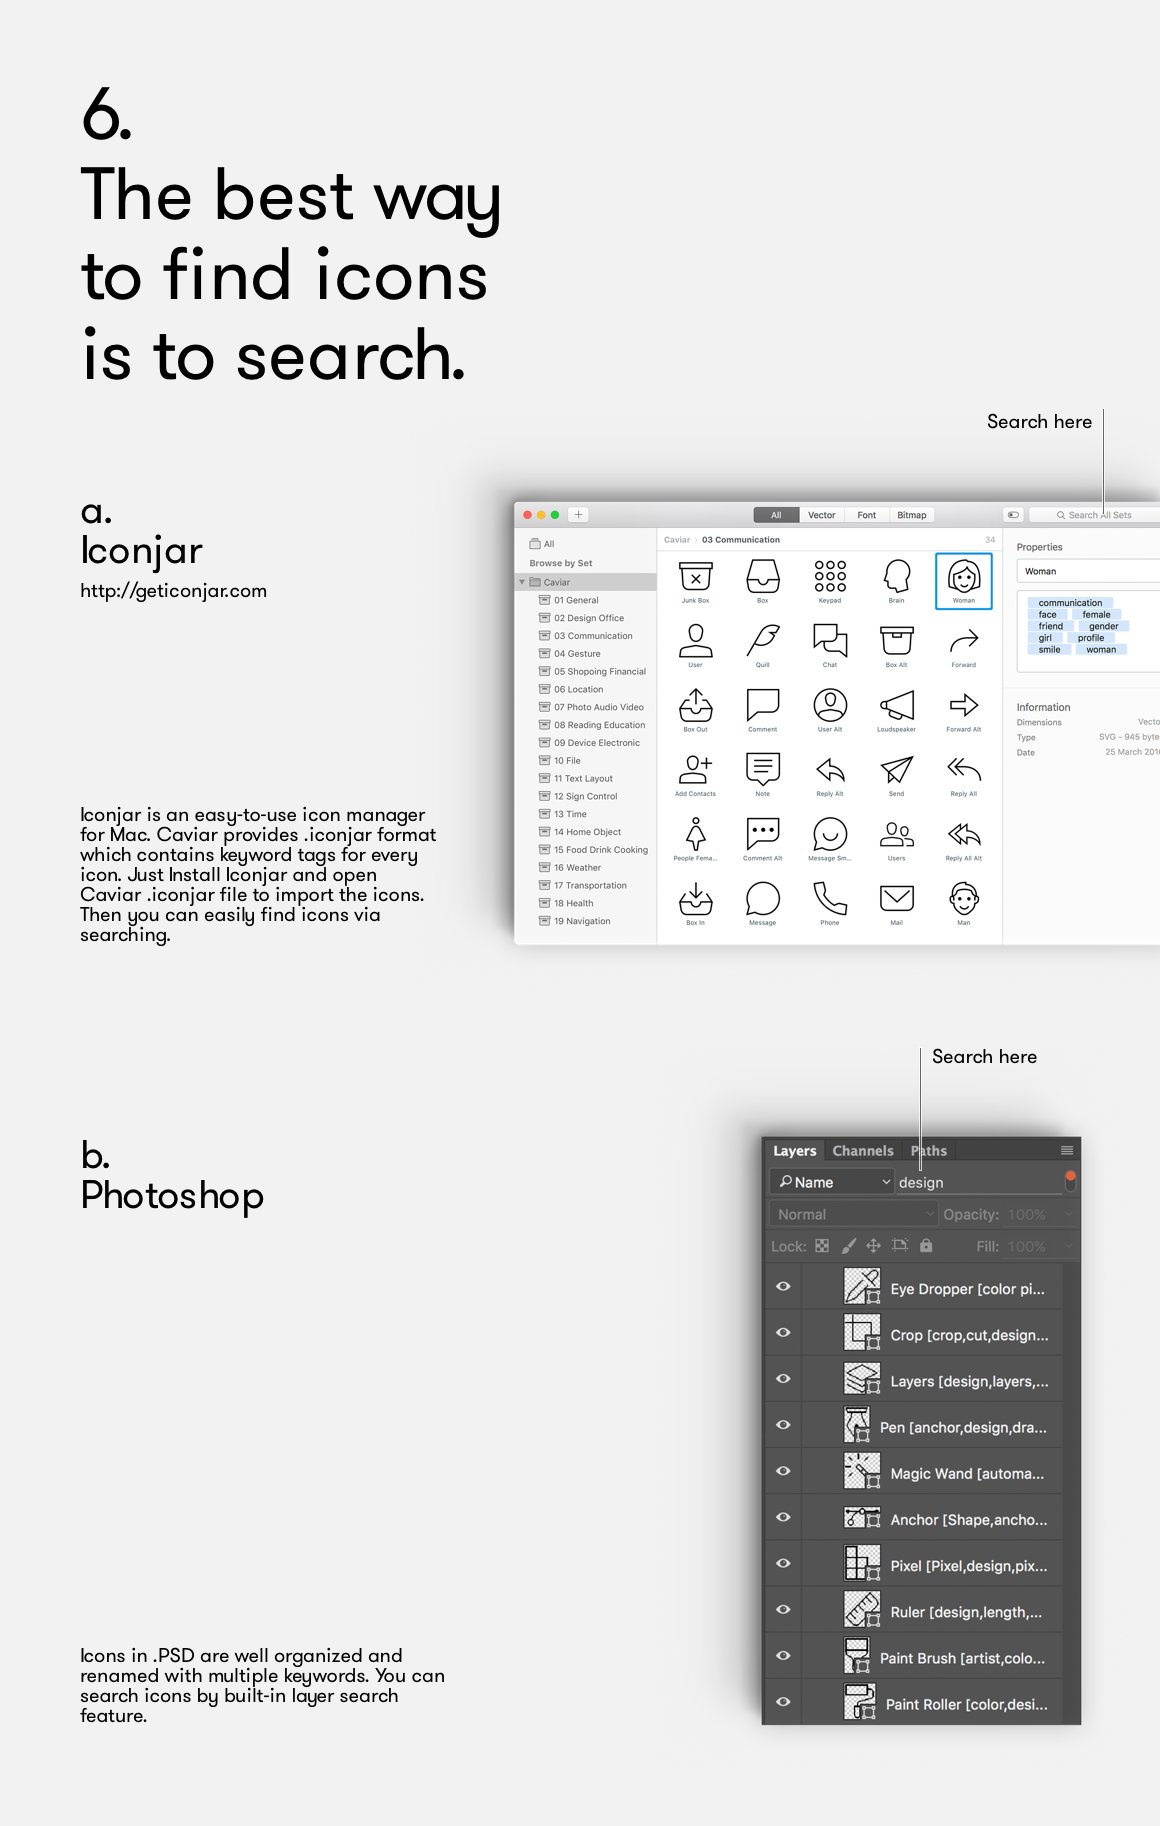 Black lettering "The best way to find icons is to search" and 2 examples in Iconjar and Photoshop on a gray background.